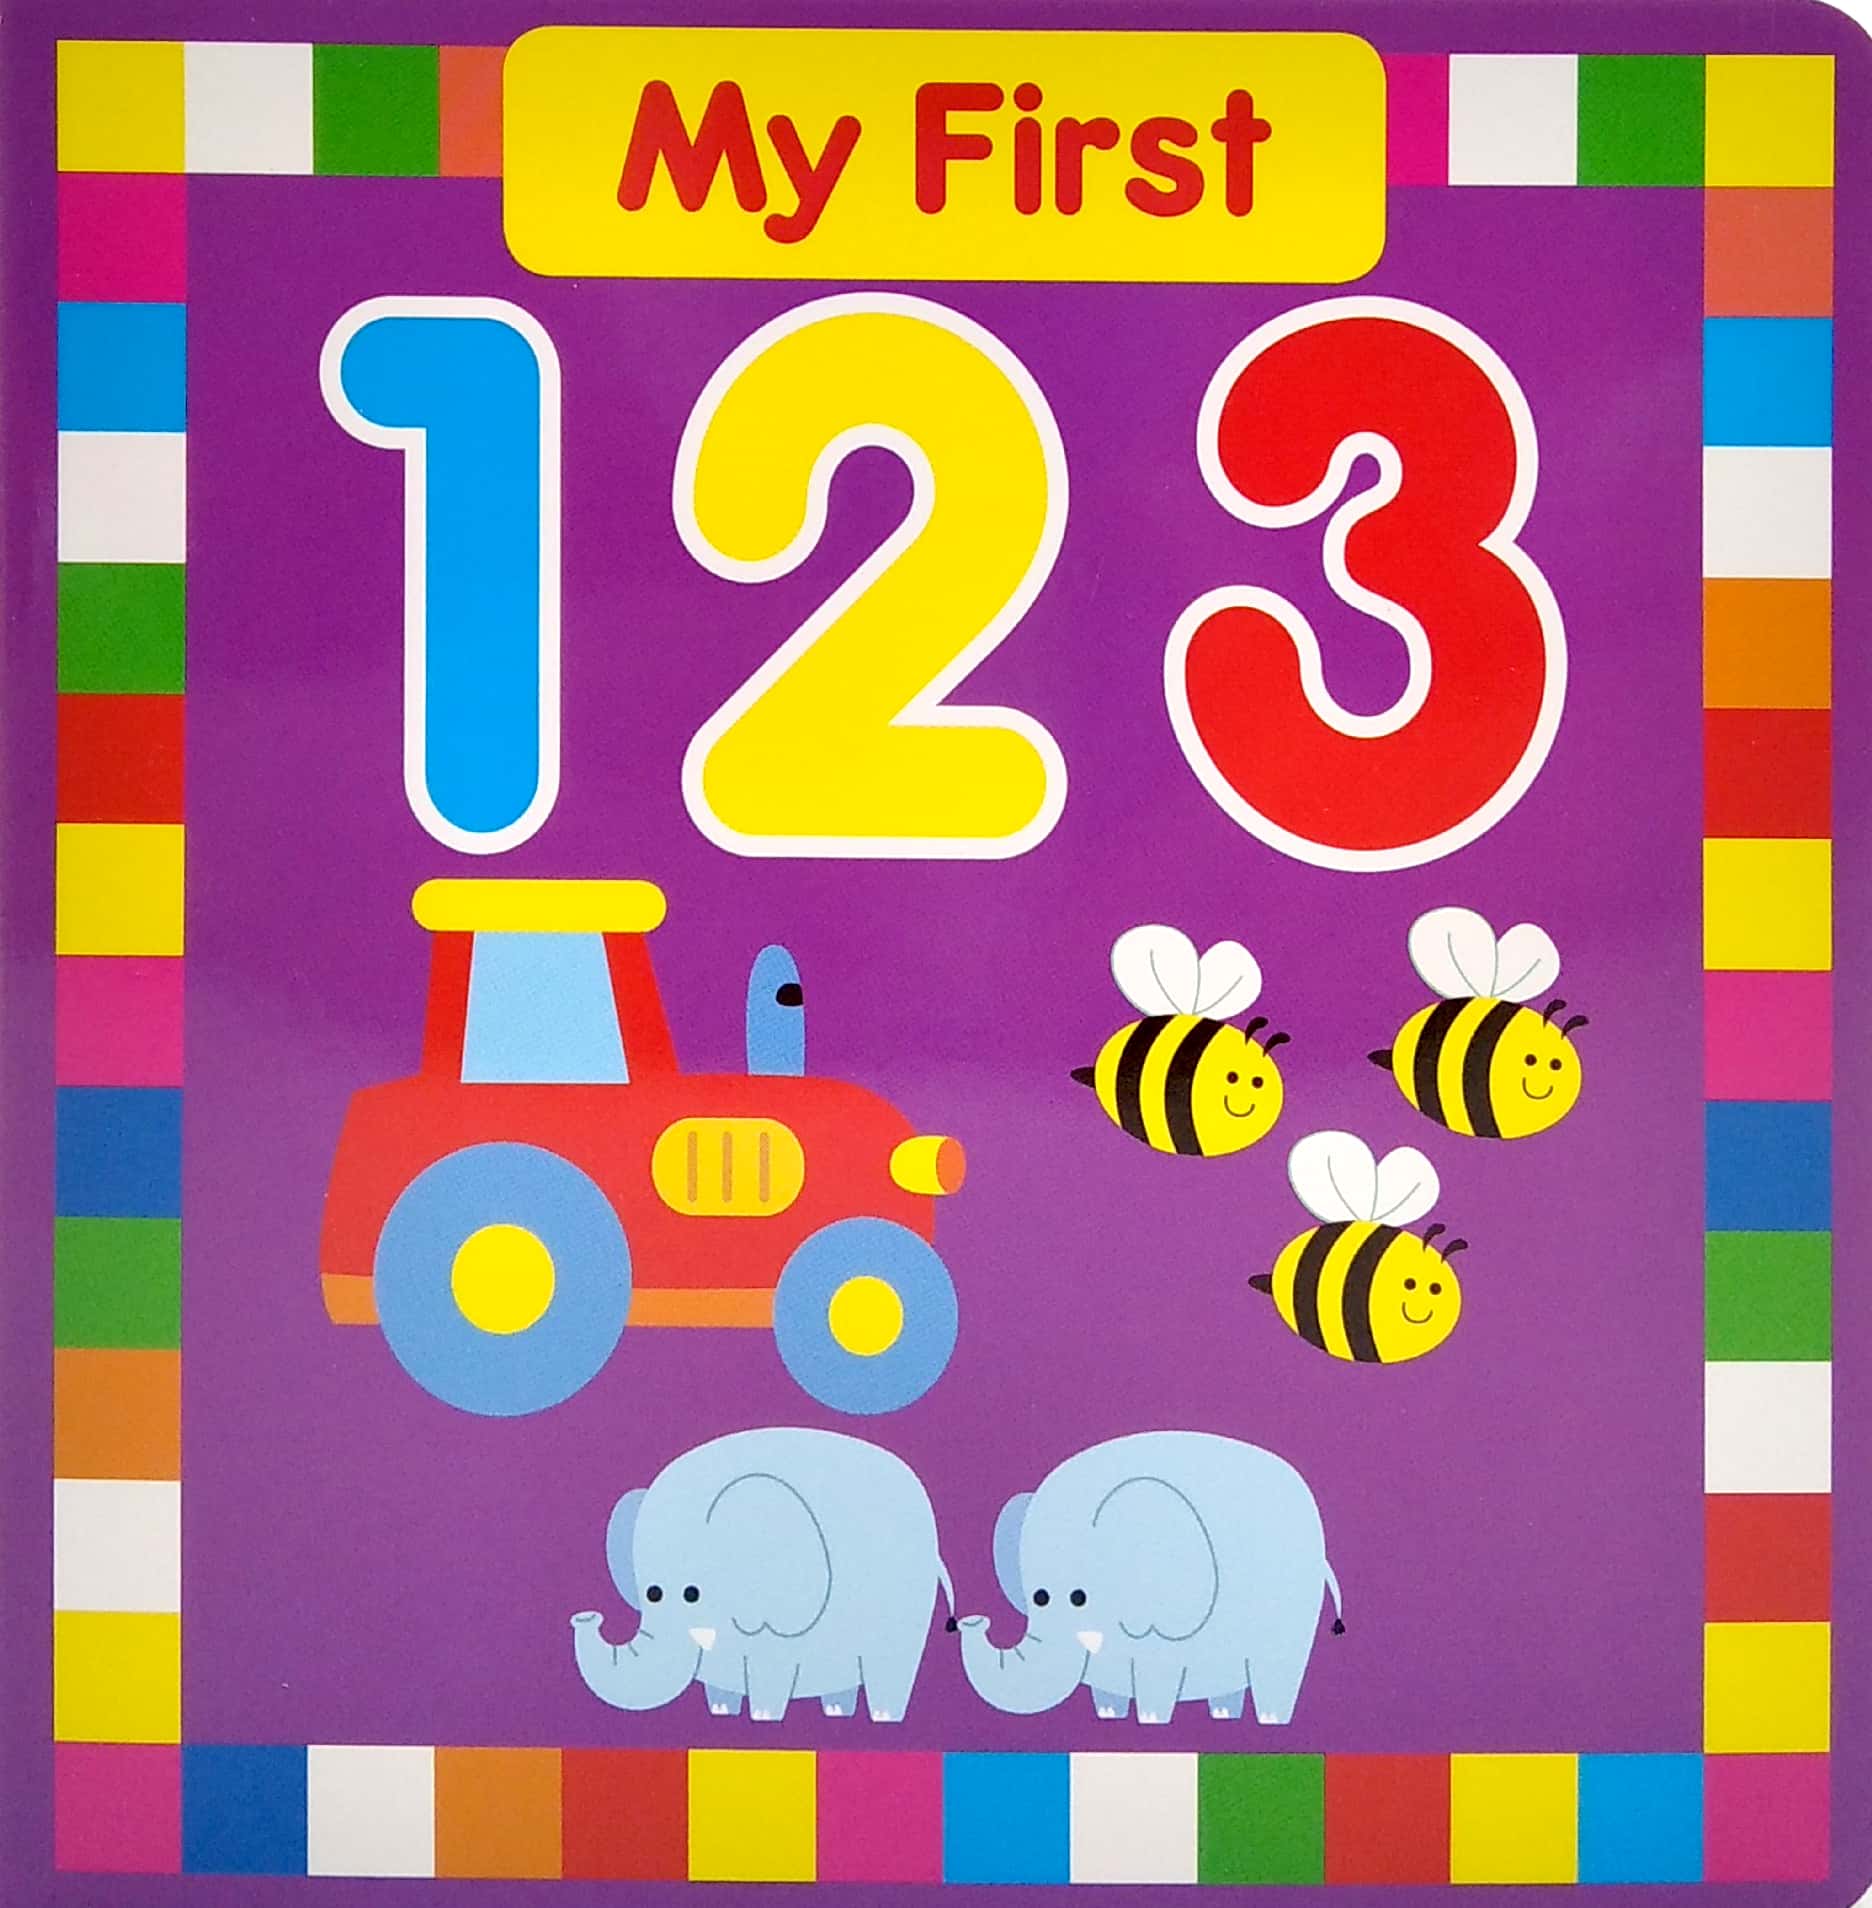 Early Learning Board: My First 123